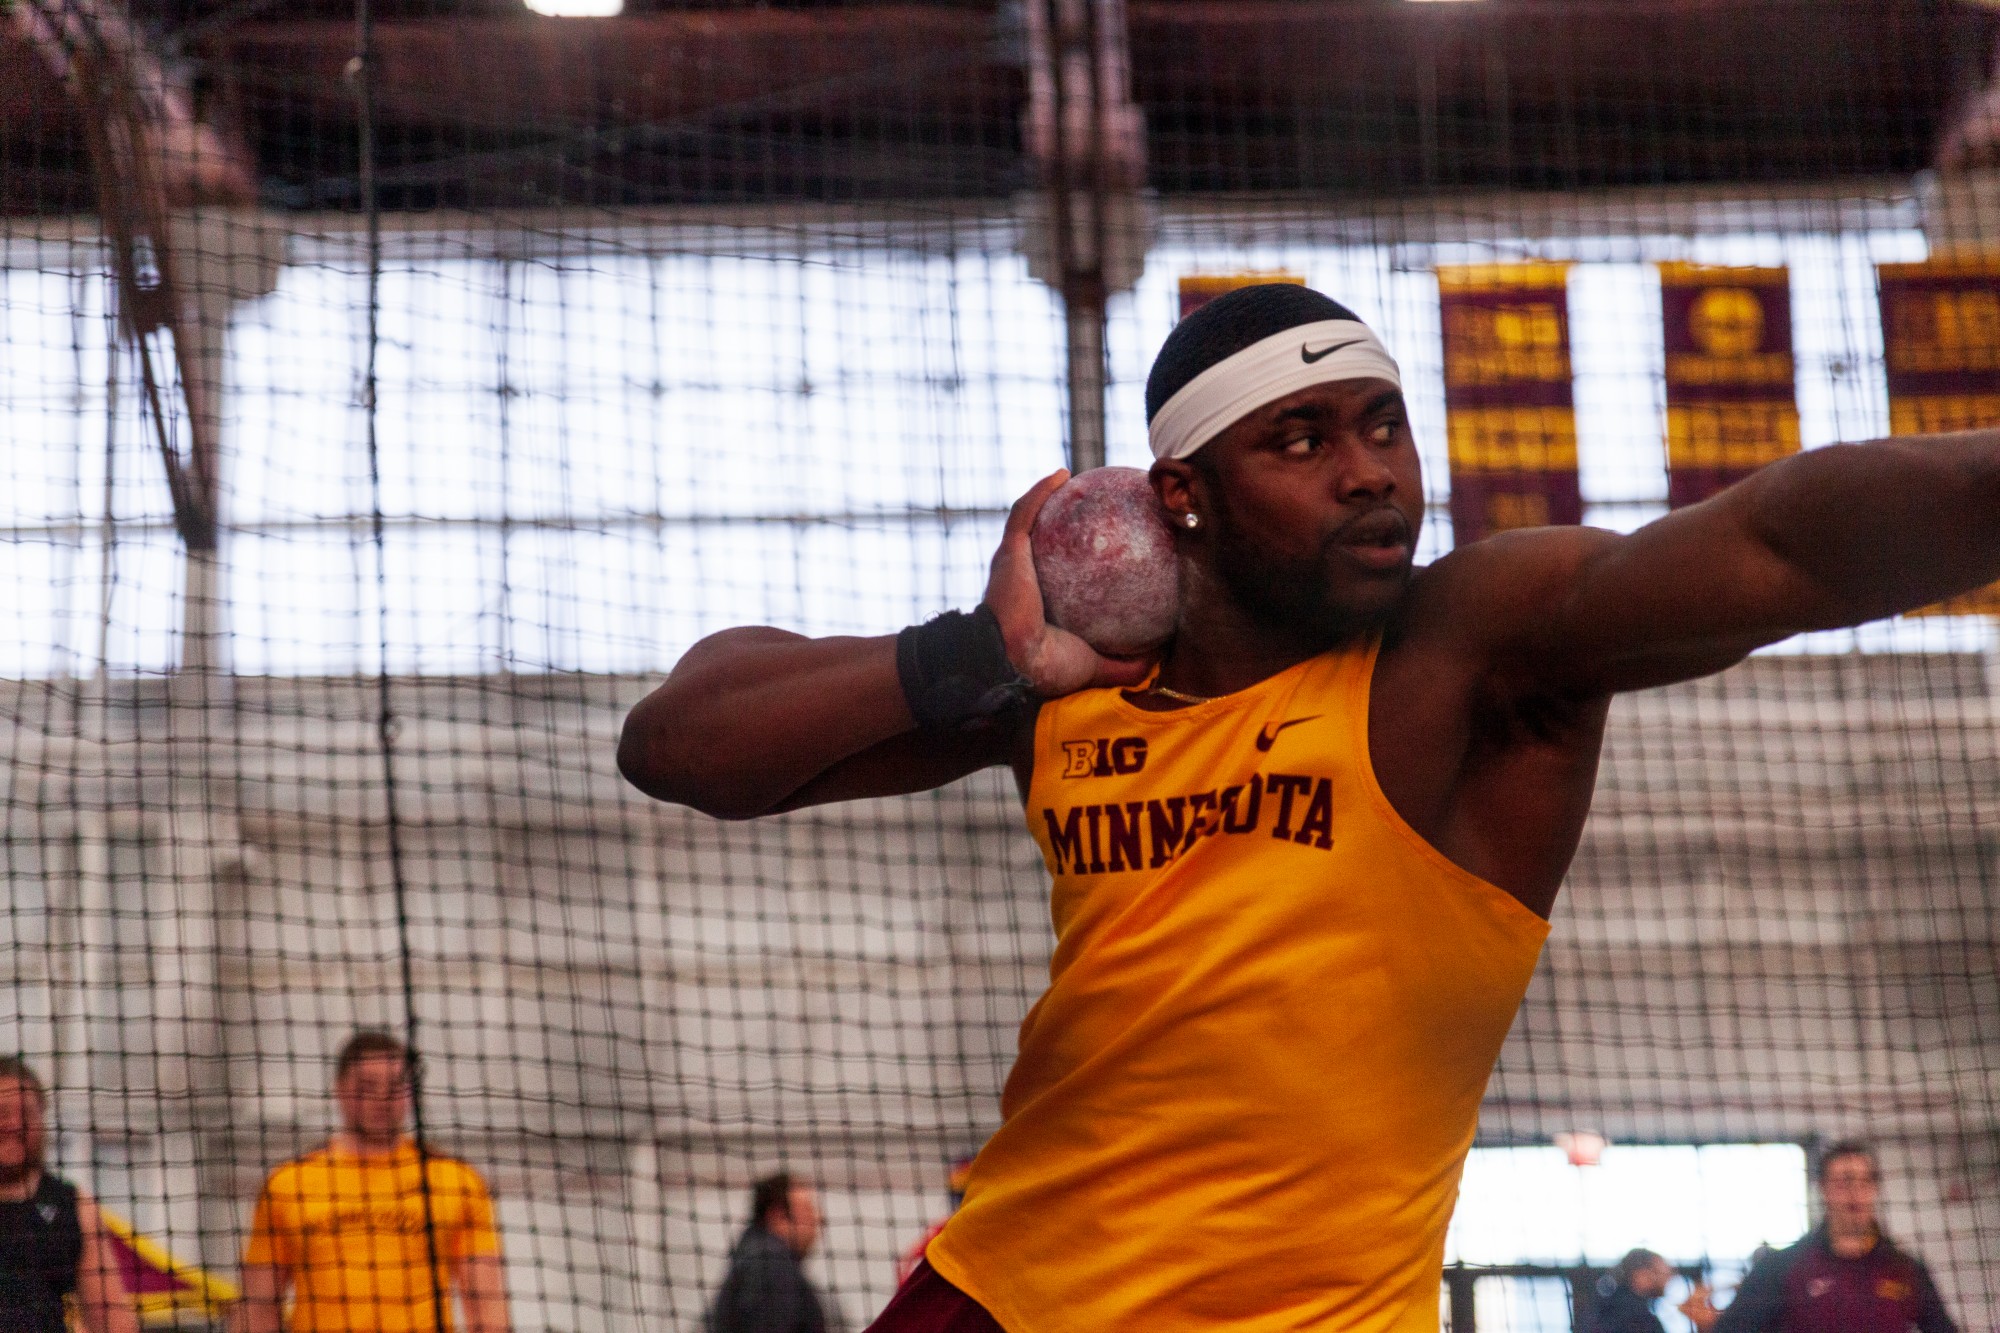 Gophers Junior Kevin Nedrick competes in the shot put at the Minnesota Cold Classic at the University of Minnesota Fieldhouse on Friday, Feb. 21.